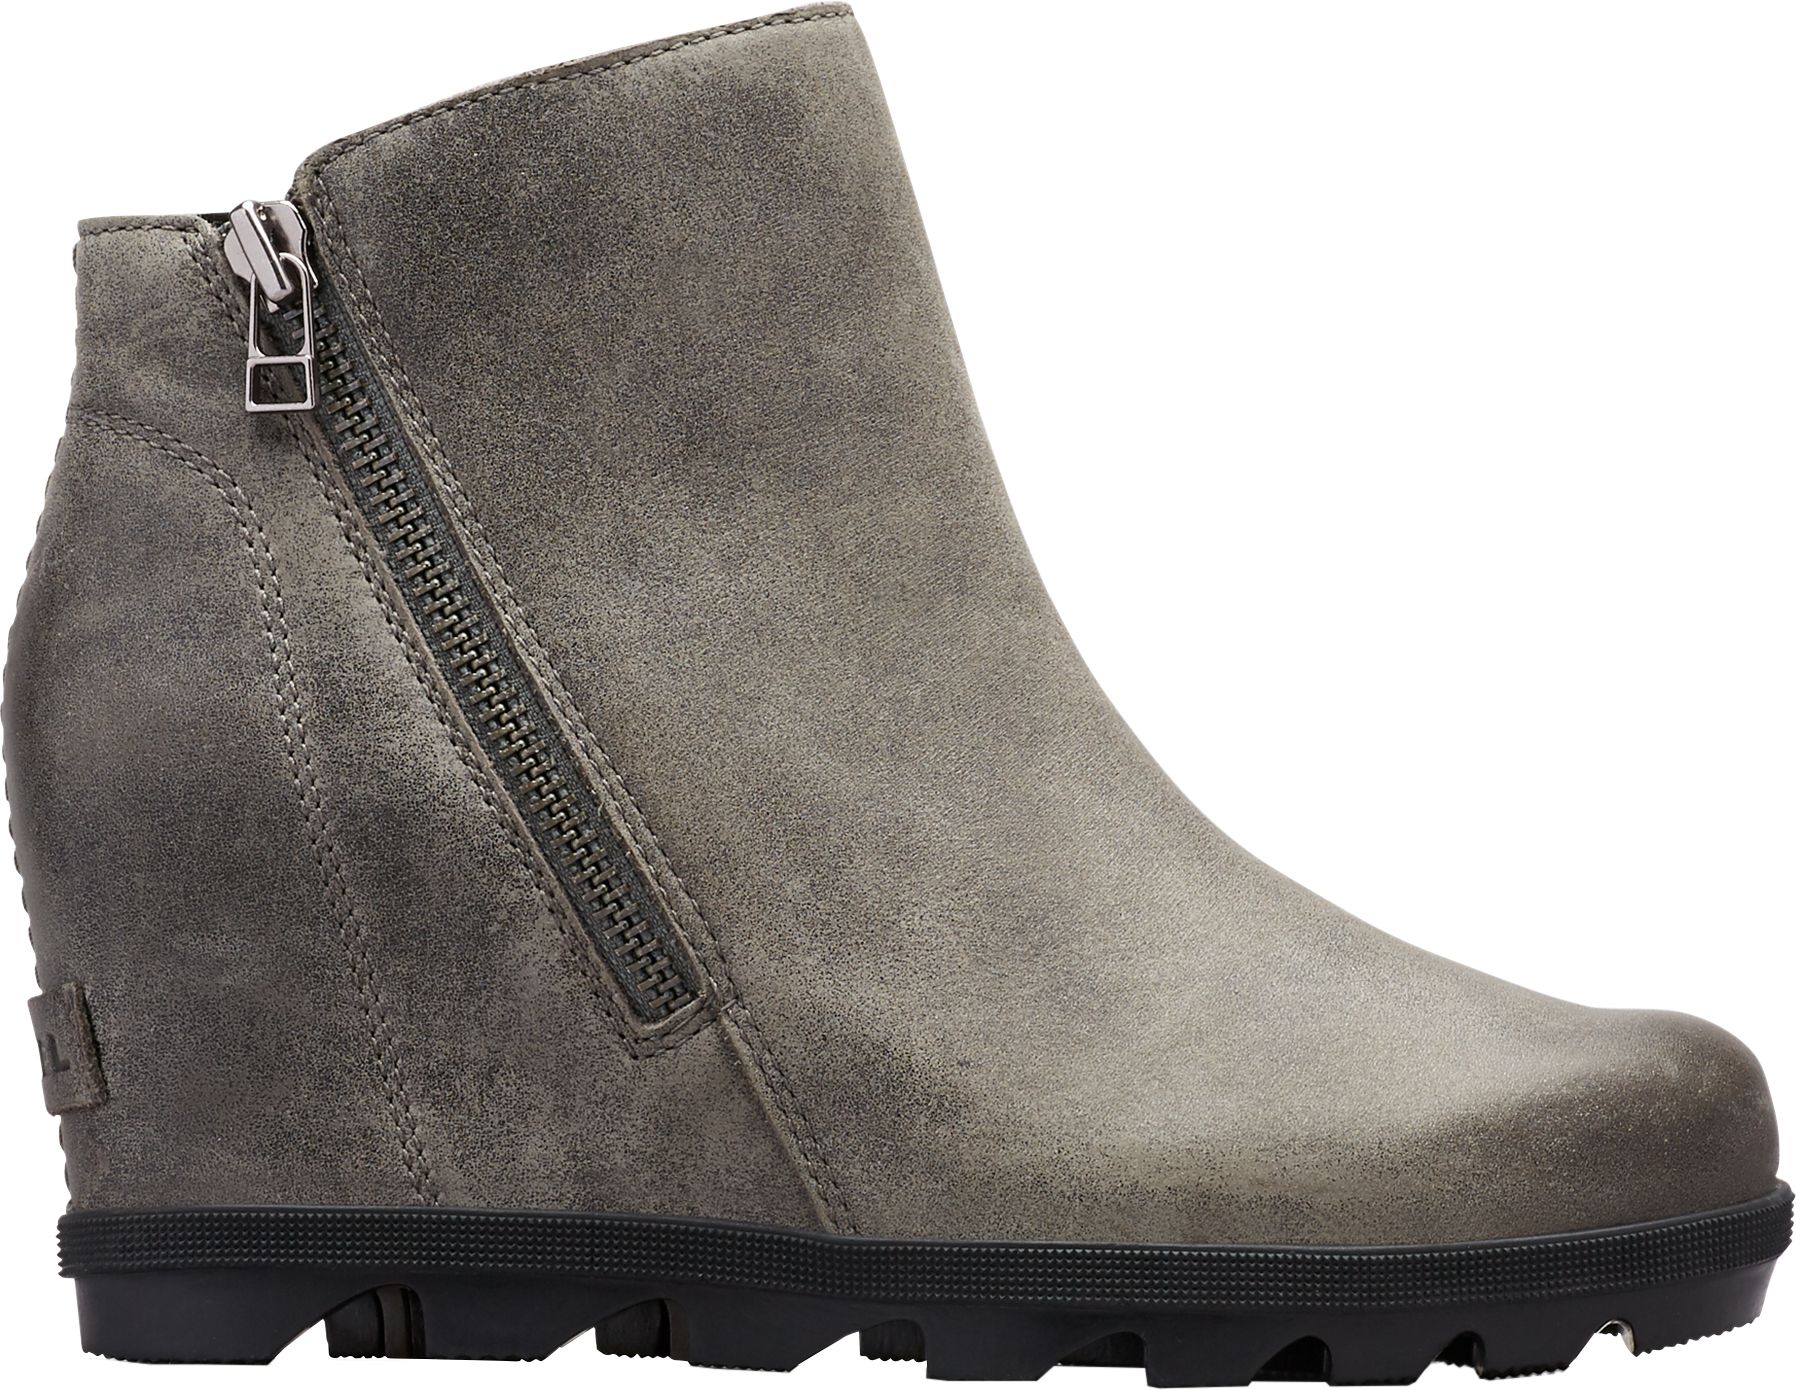 sorel wedge boots clearance